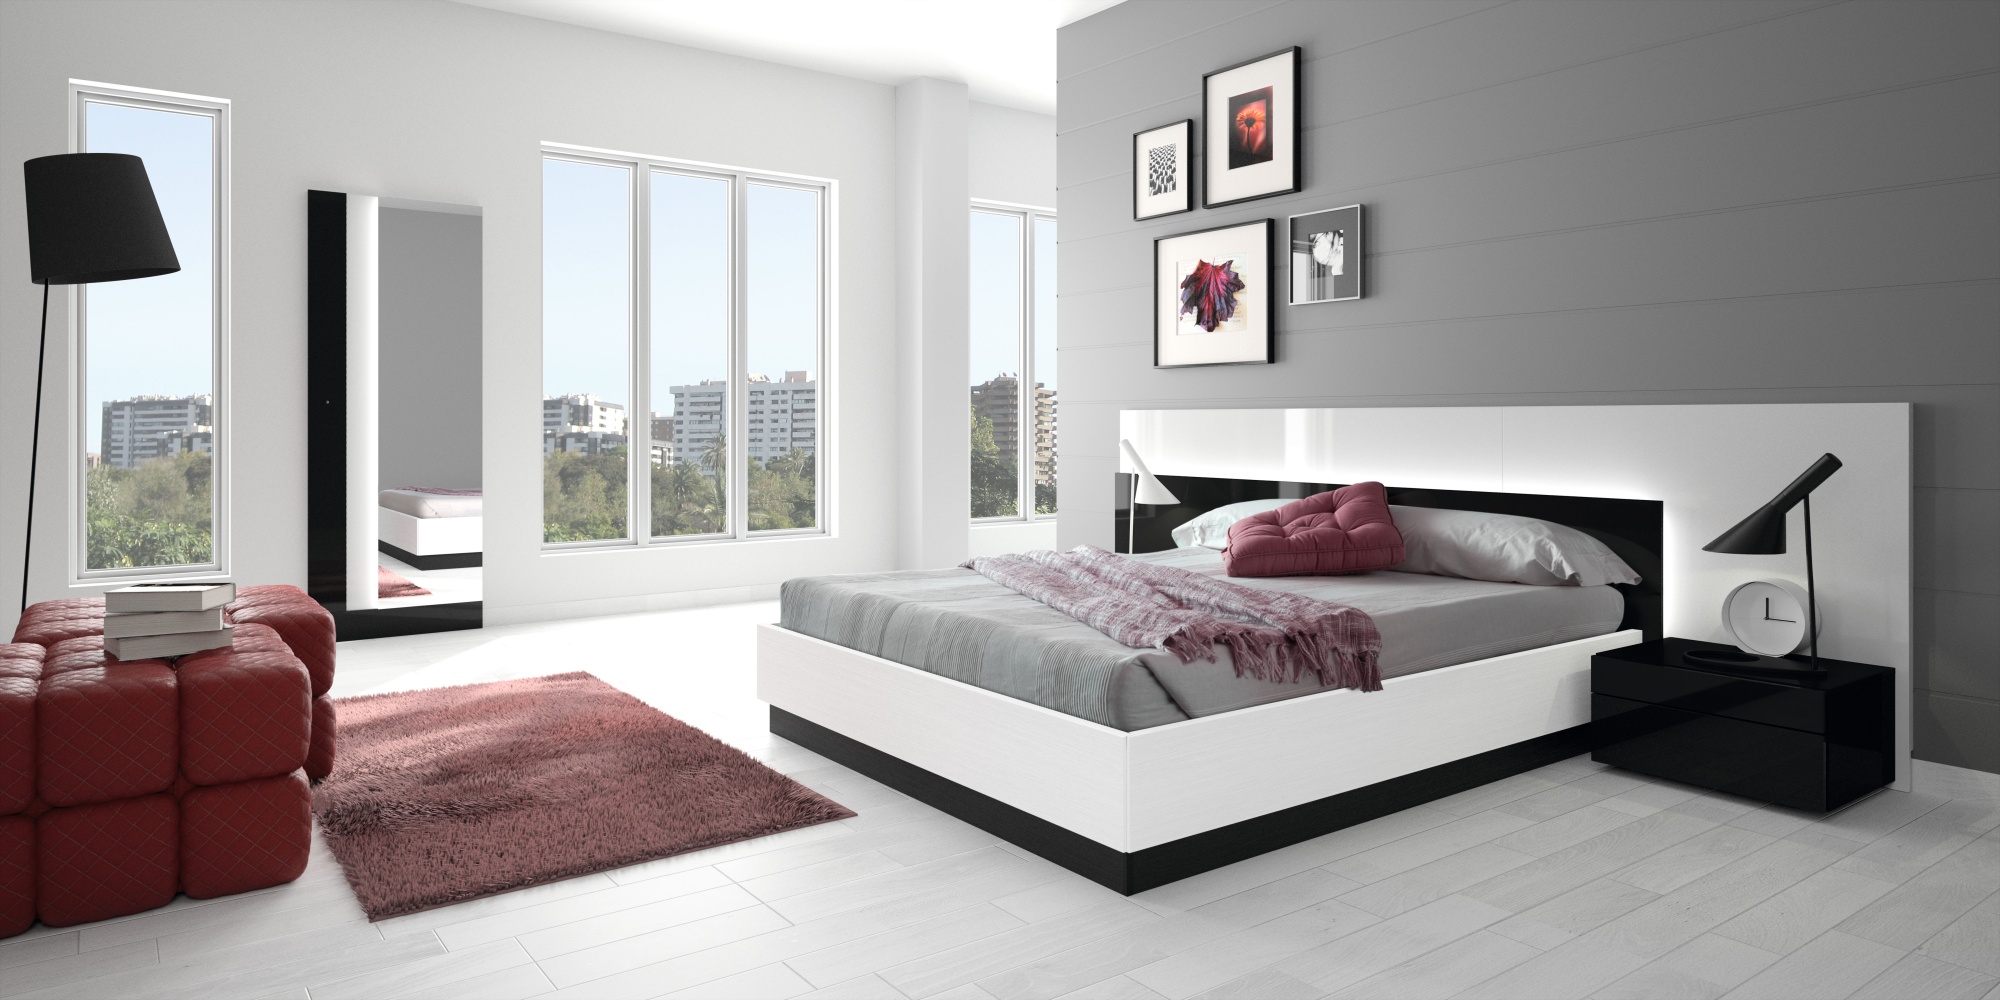 choosing furniture for your bedroom